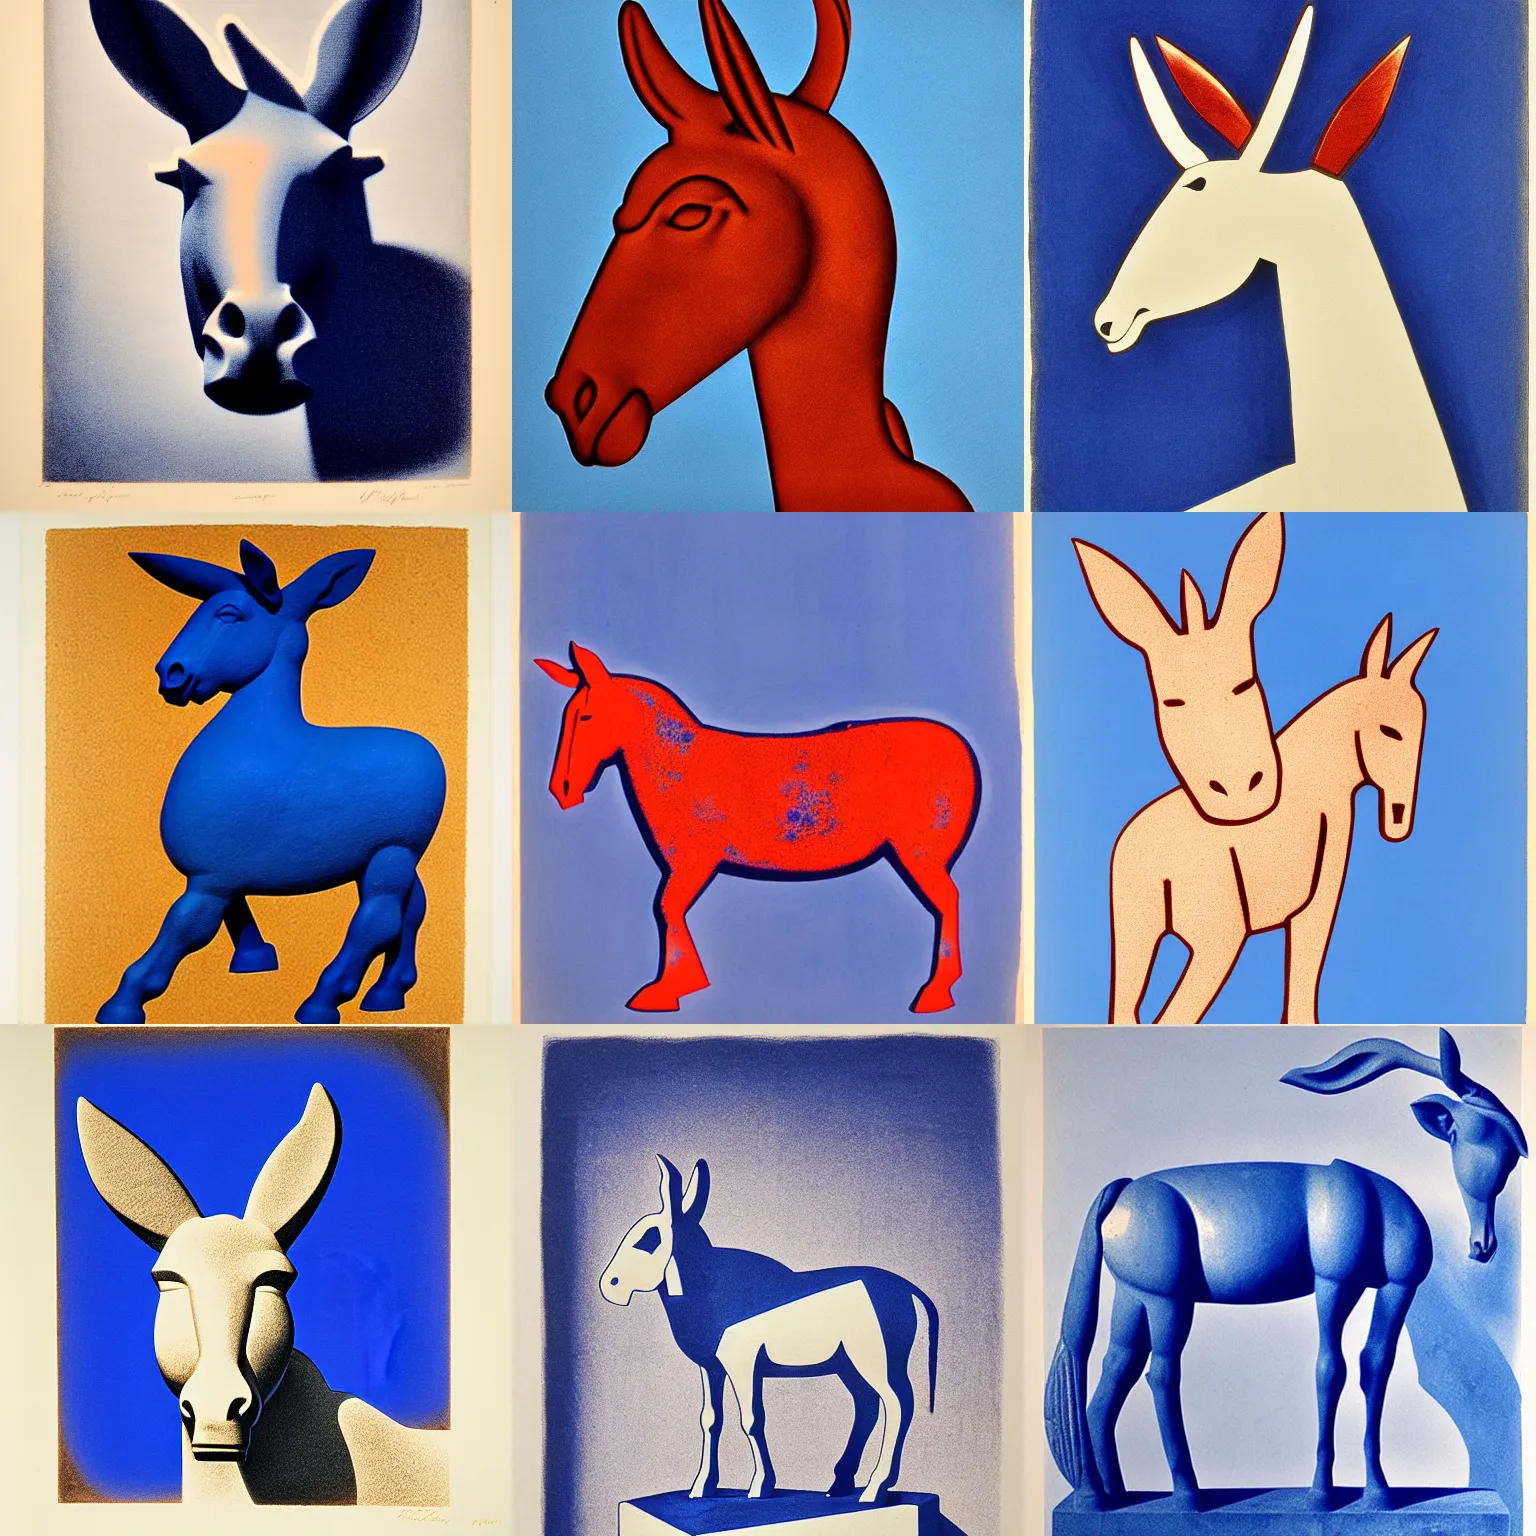 Prompt: duotone lithograph of sculpture of donkey in cycladic style, ultramarine blue and red iron oxide